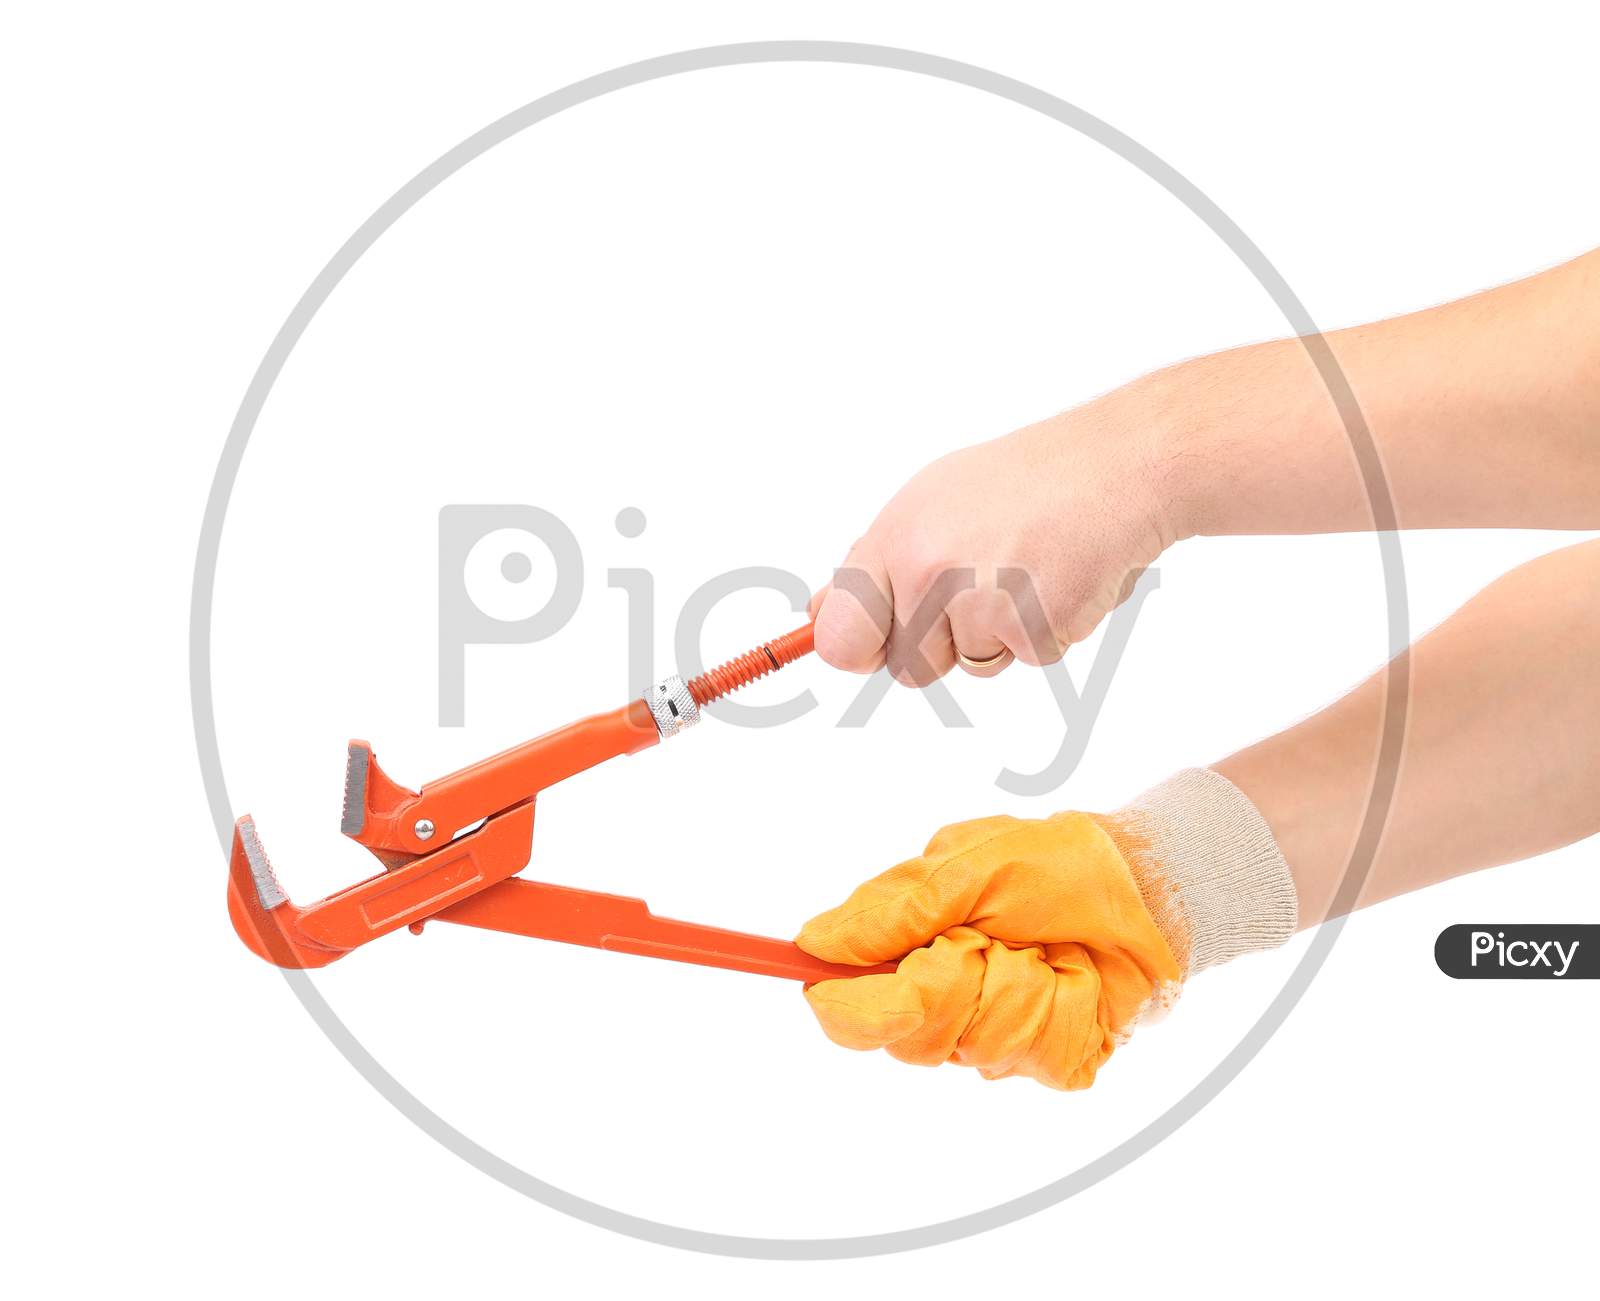 Wiew Of Hands Opening A Wrench. Isolated On A White Background.